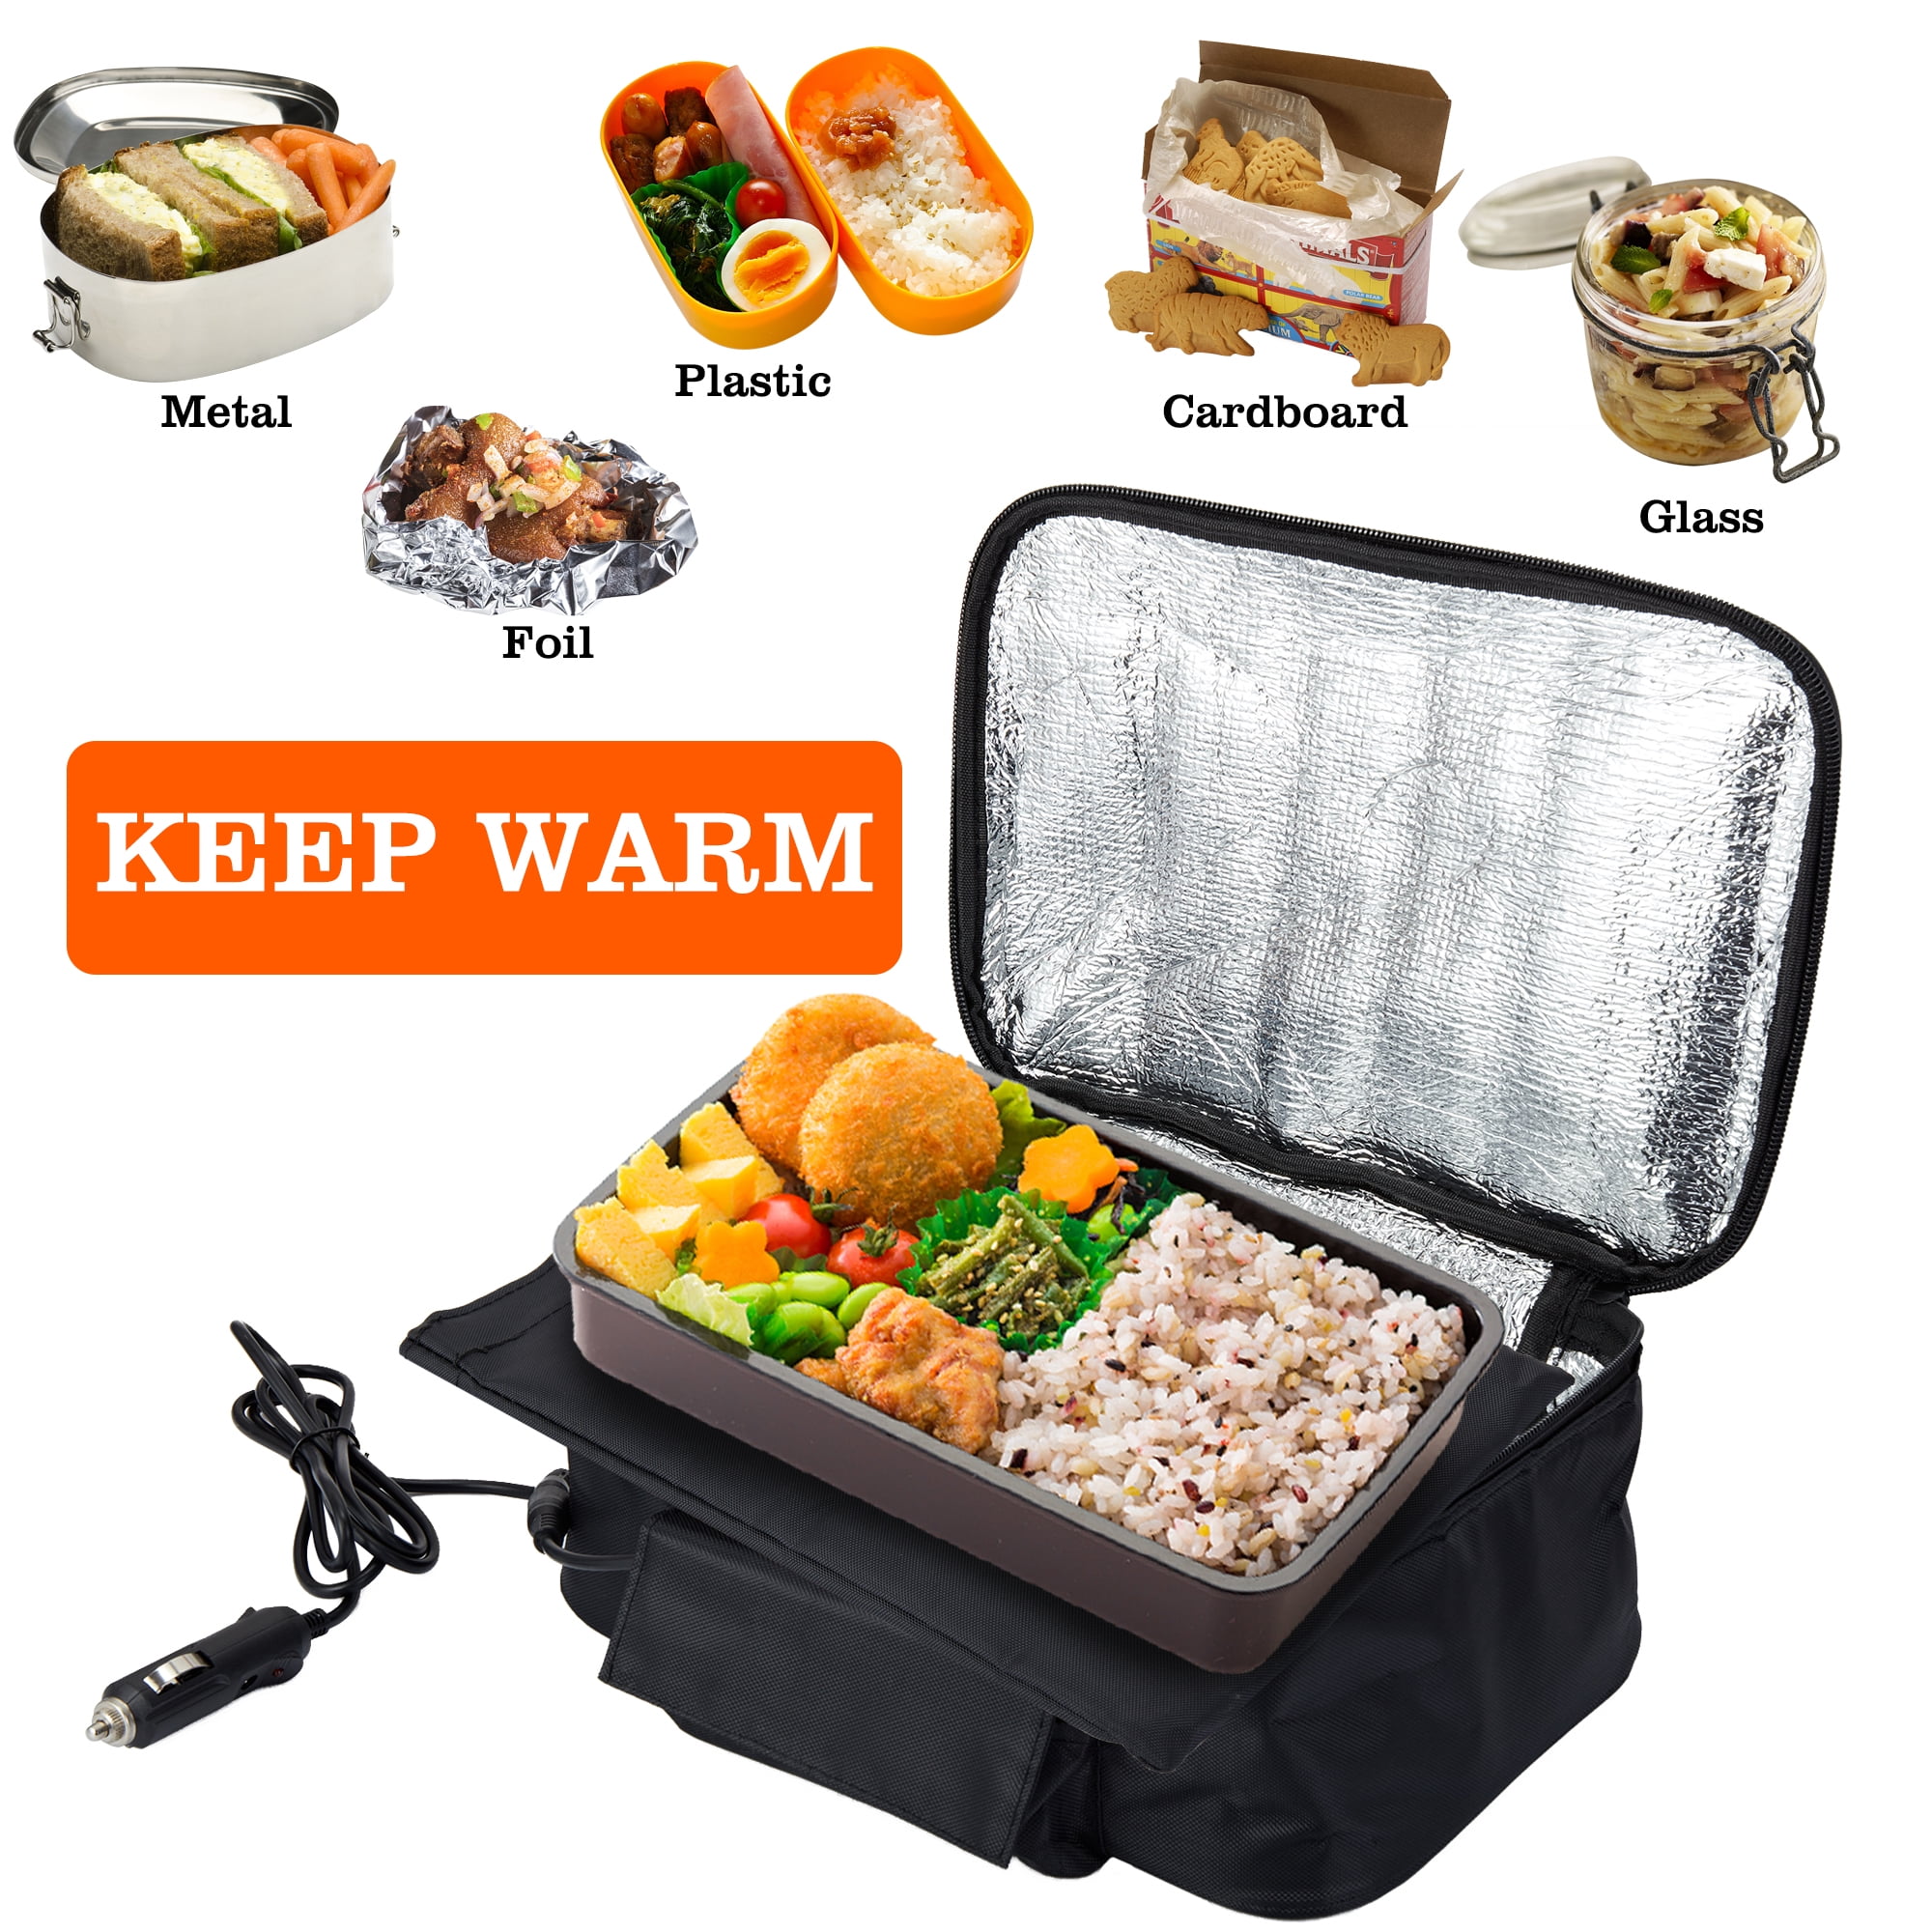  SabotHeat Portable Car Microwave - 12V40W Hot Plate Personal  Oven with On/Off Switch for Reheating & Slow Cooker, Car Food Warmer Lunch  Box for Work, Trip, Camping: Home & Kitchen